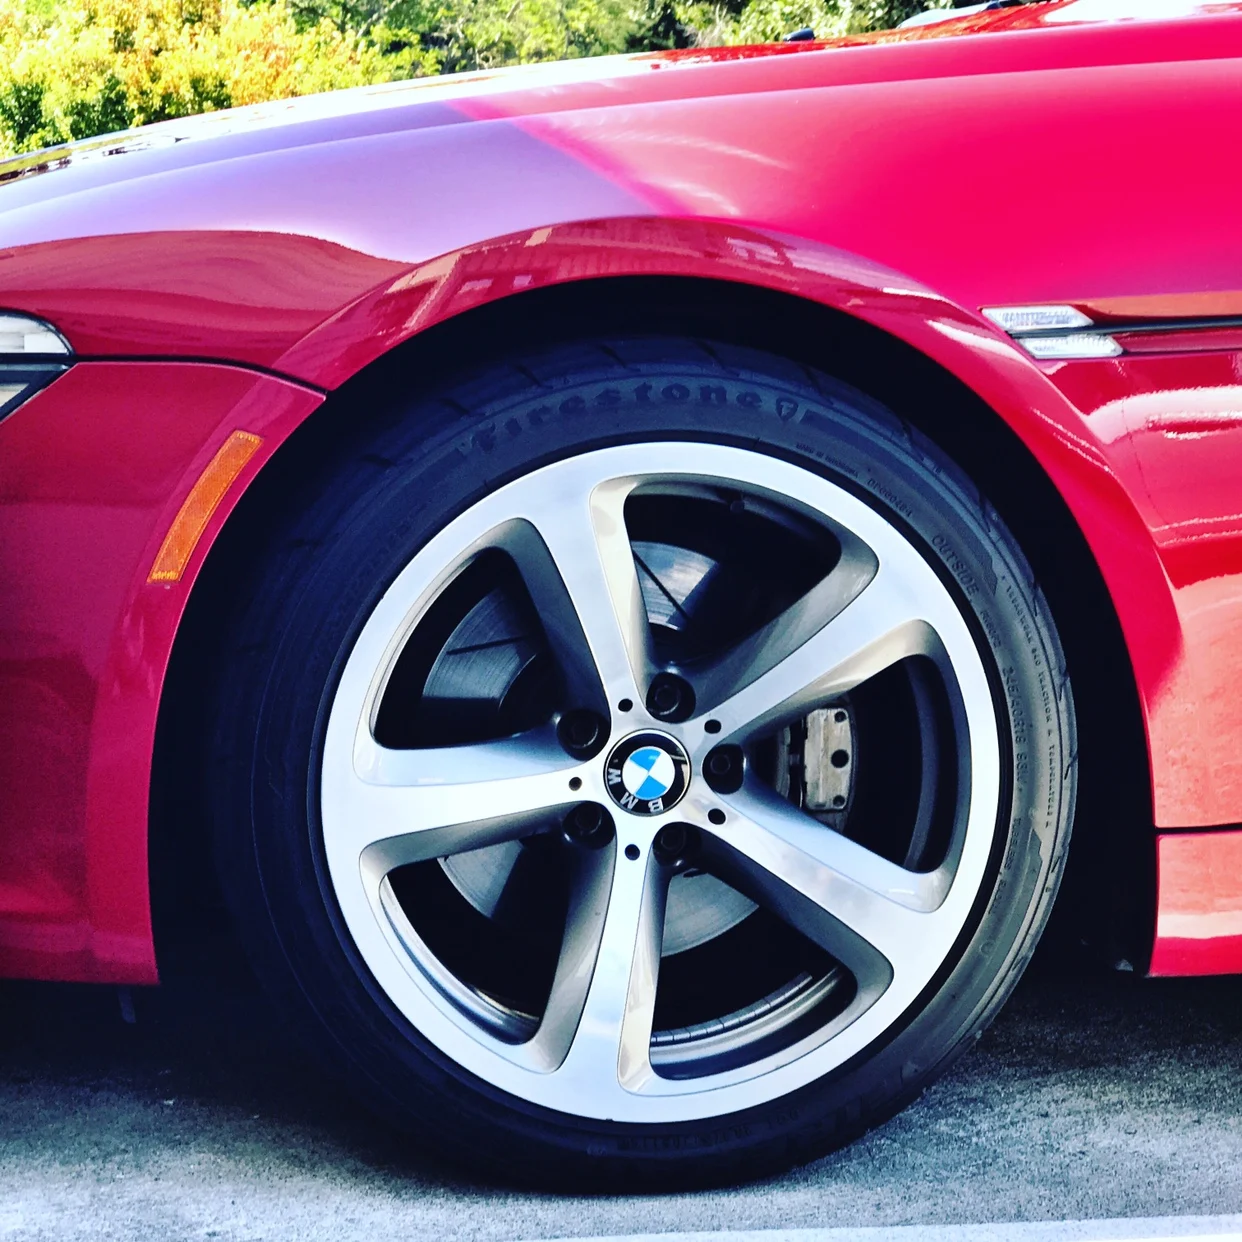 Will wheel spacers throw off alignment?